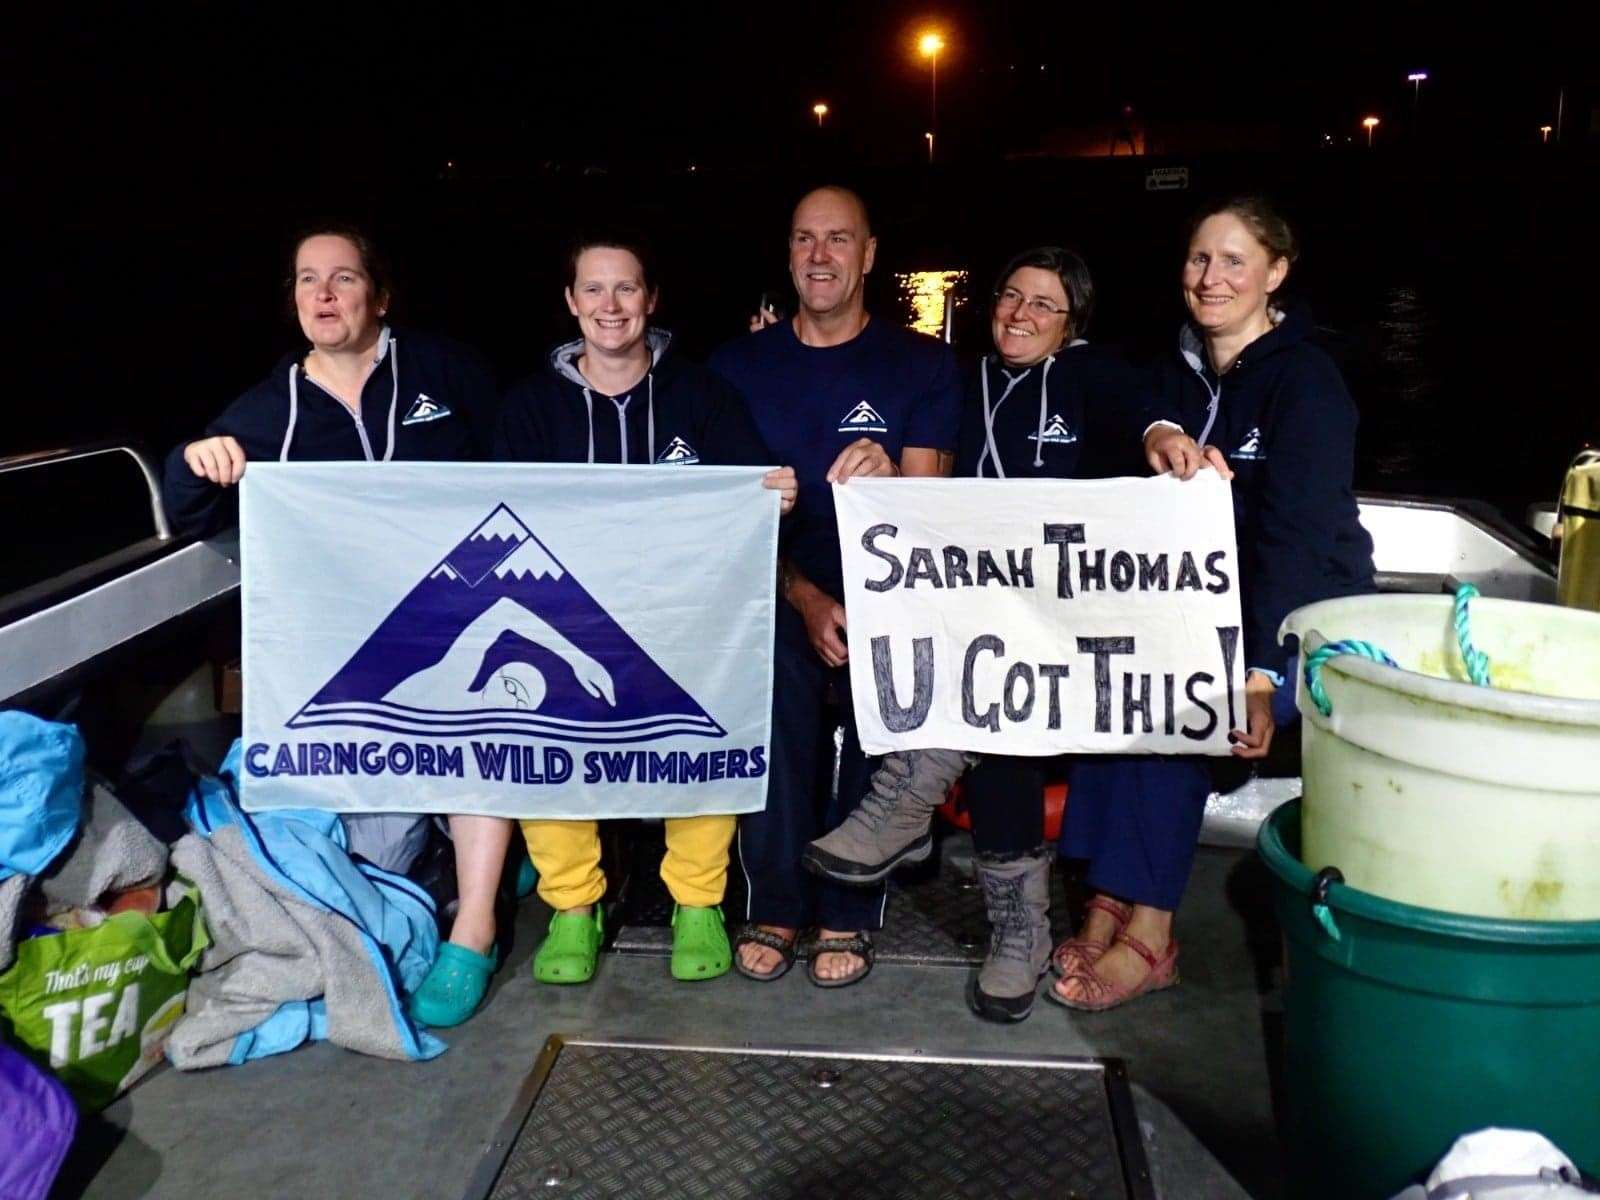 There was plenty of support and not only for their fellow Cairngorm swimmers. The group made placards to support Thomas in her record-breaking crossings.